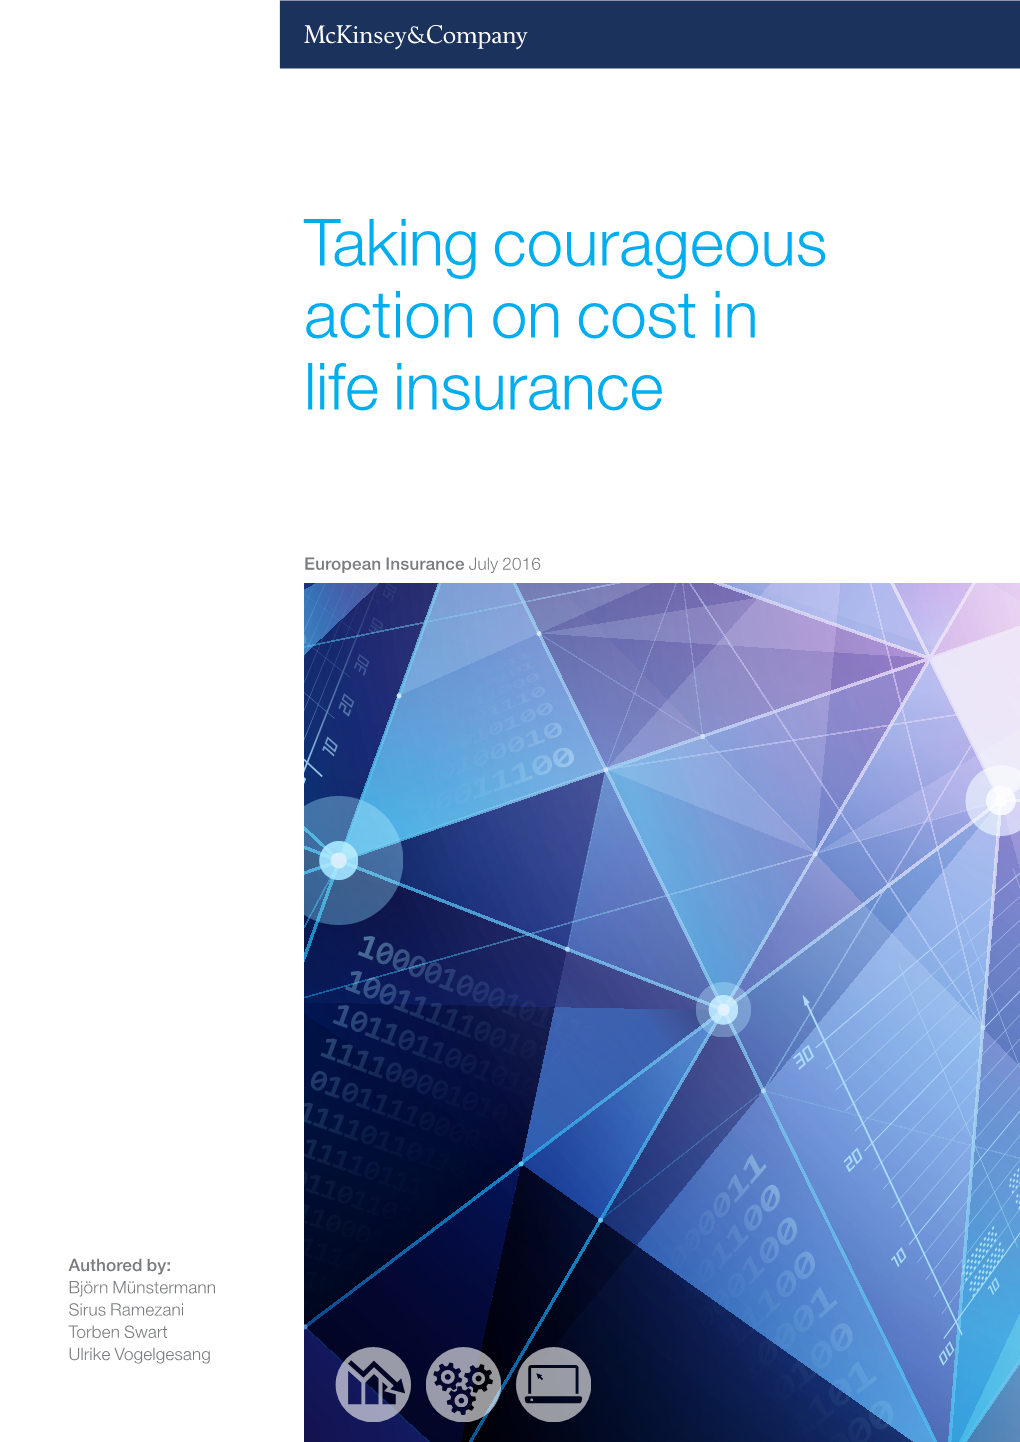 Taking Courageous Action on Cost in Life Insurance